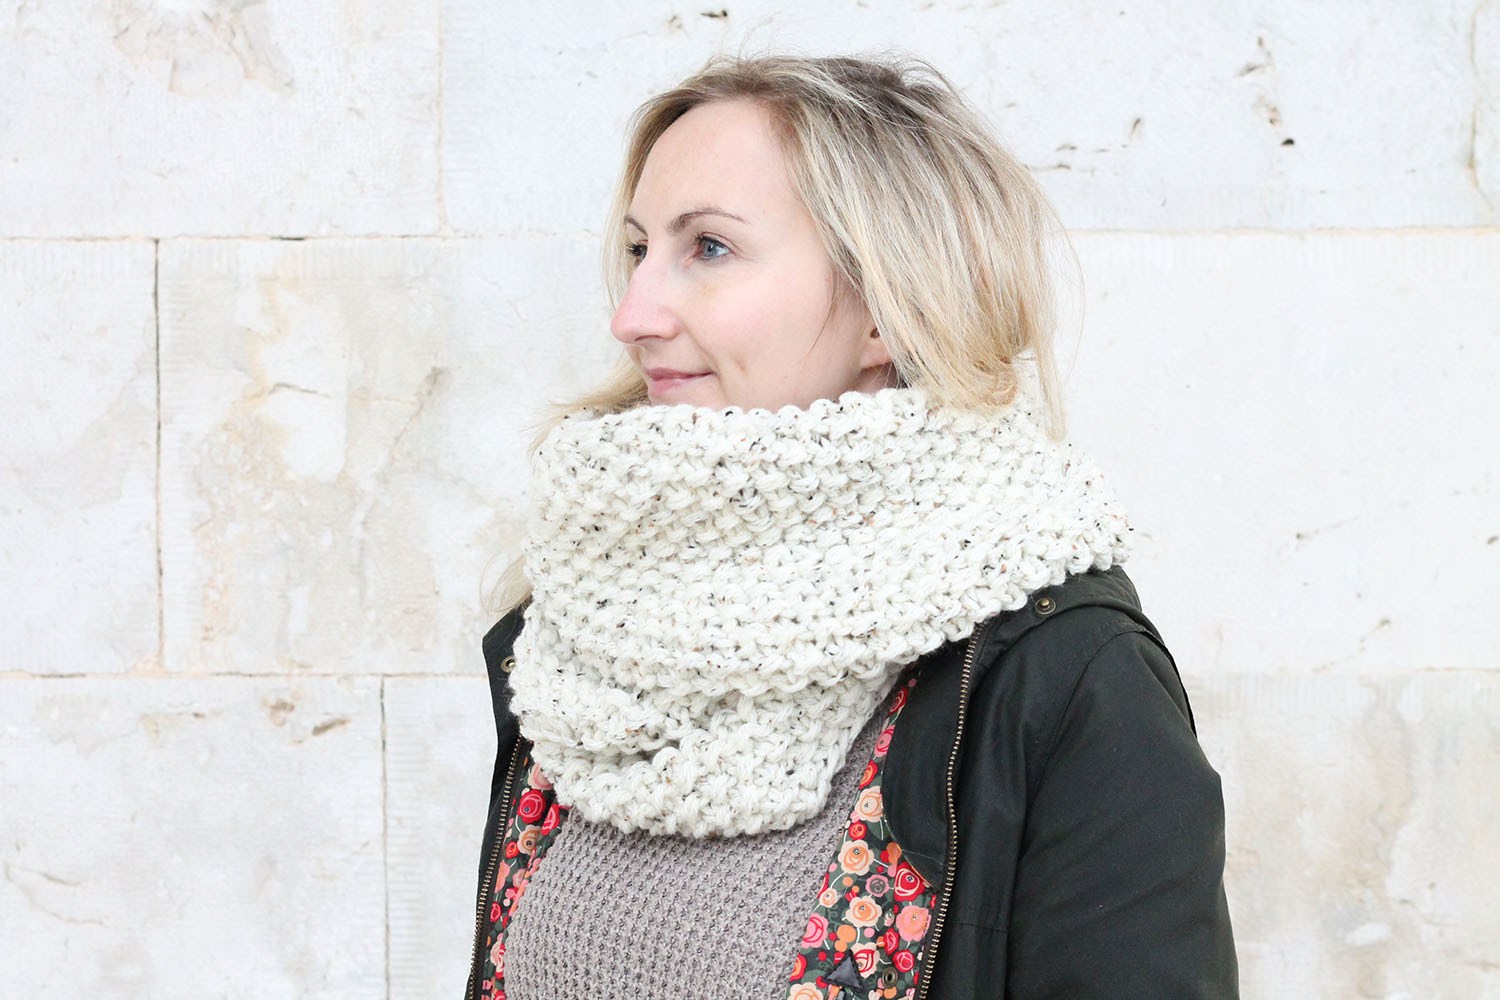 Infinity Scarf - We’ve gathered here 21 cozy scarf knitting patterns that you can knit quickly, just in time for fall and impending winter. #ScarfKnittingPatterns #KnittingPatterns #ScarfPatterns